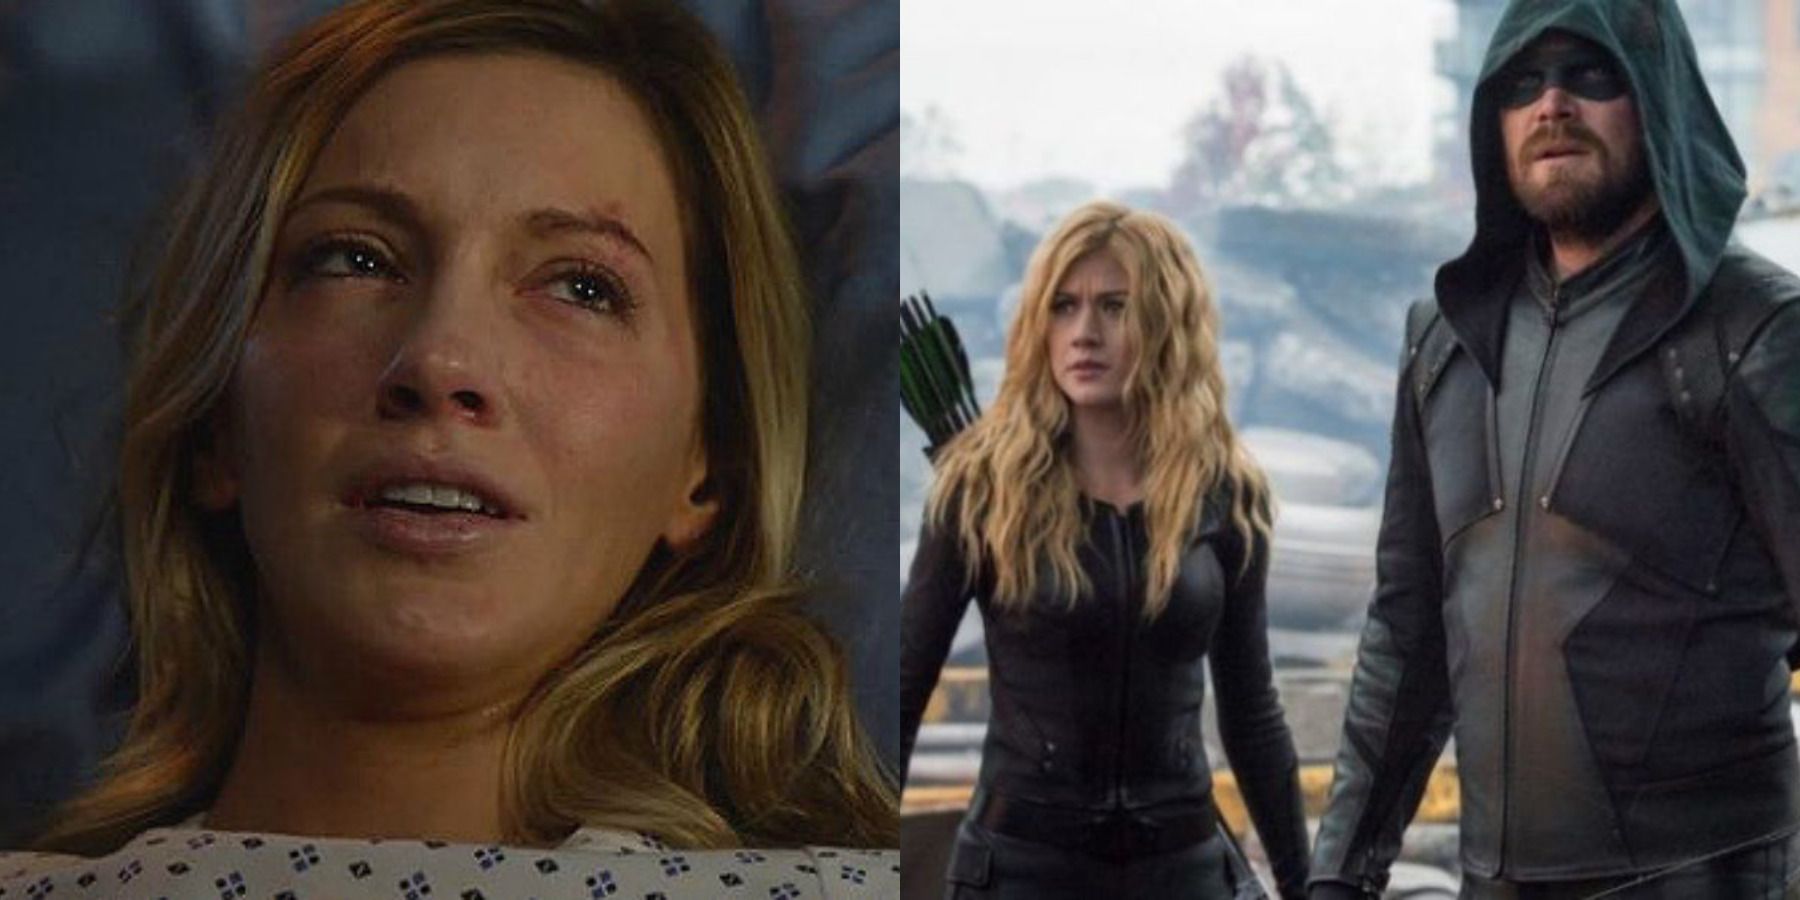 Oliver Queen feature split image Laurel Lance dying and Oliver with Mia